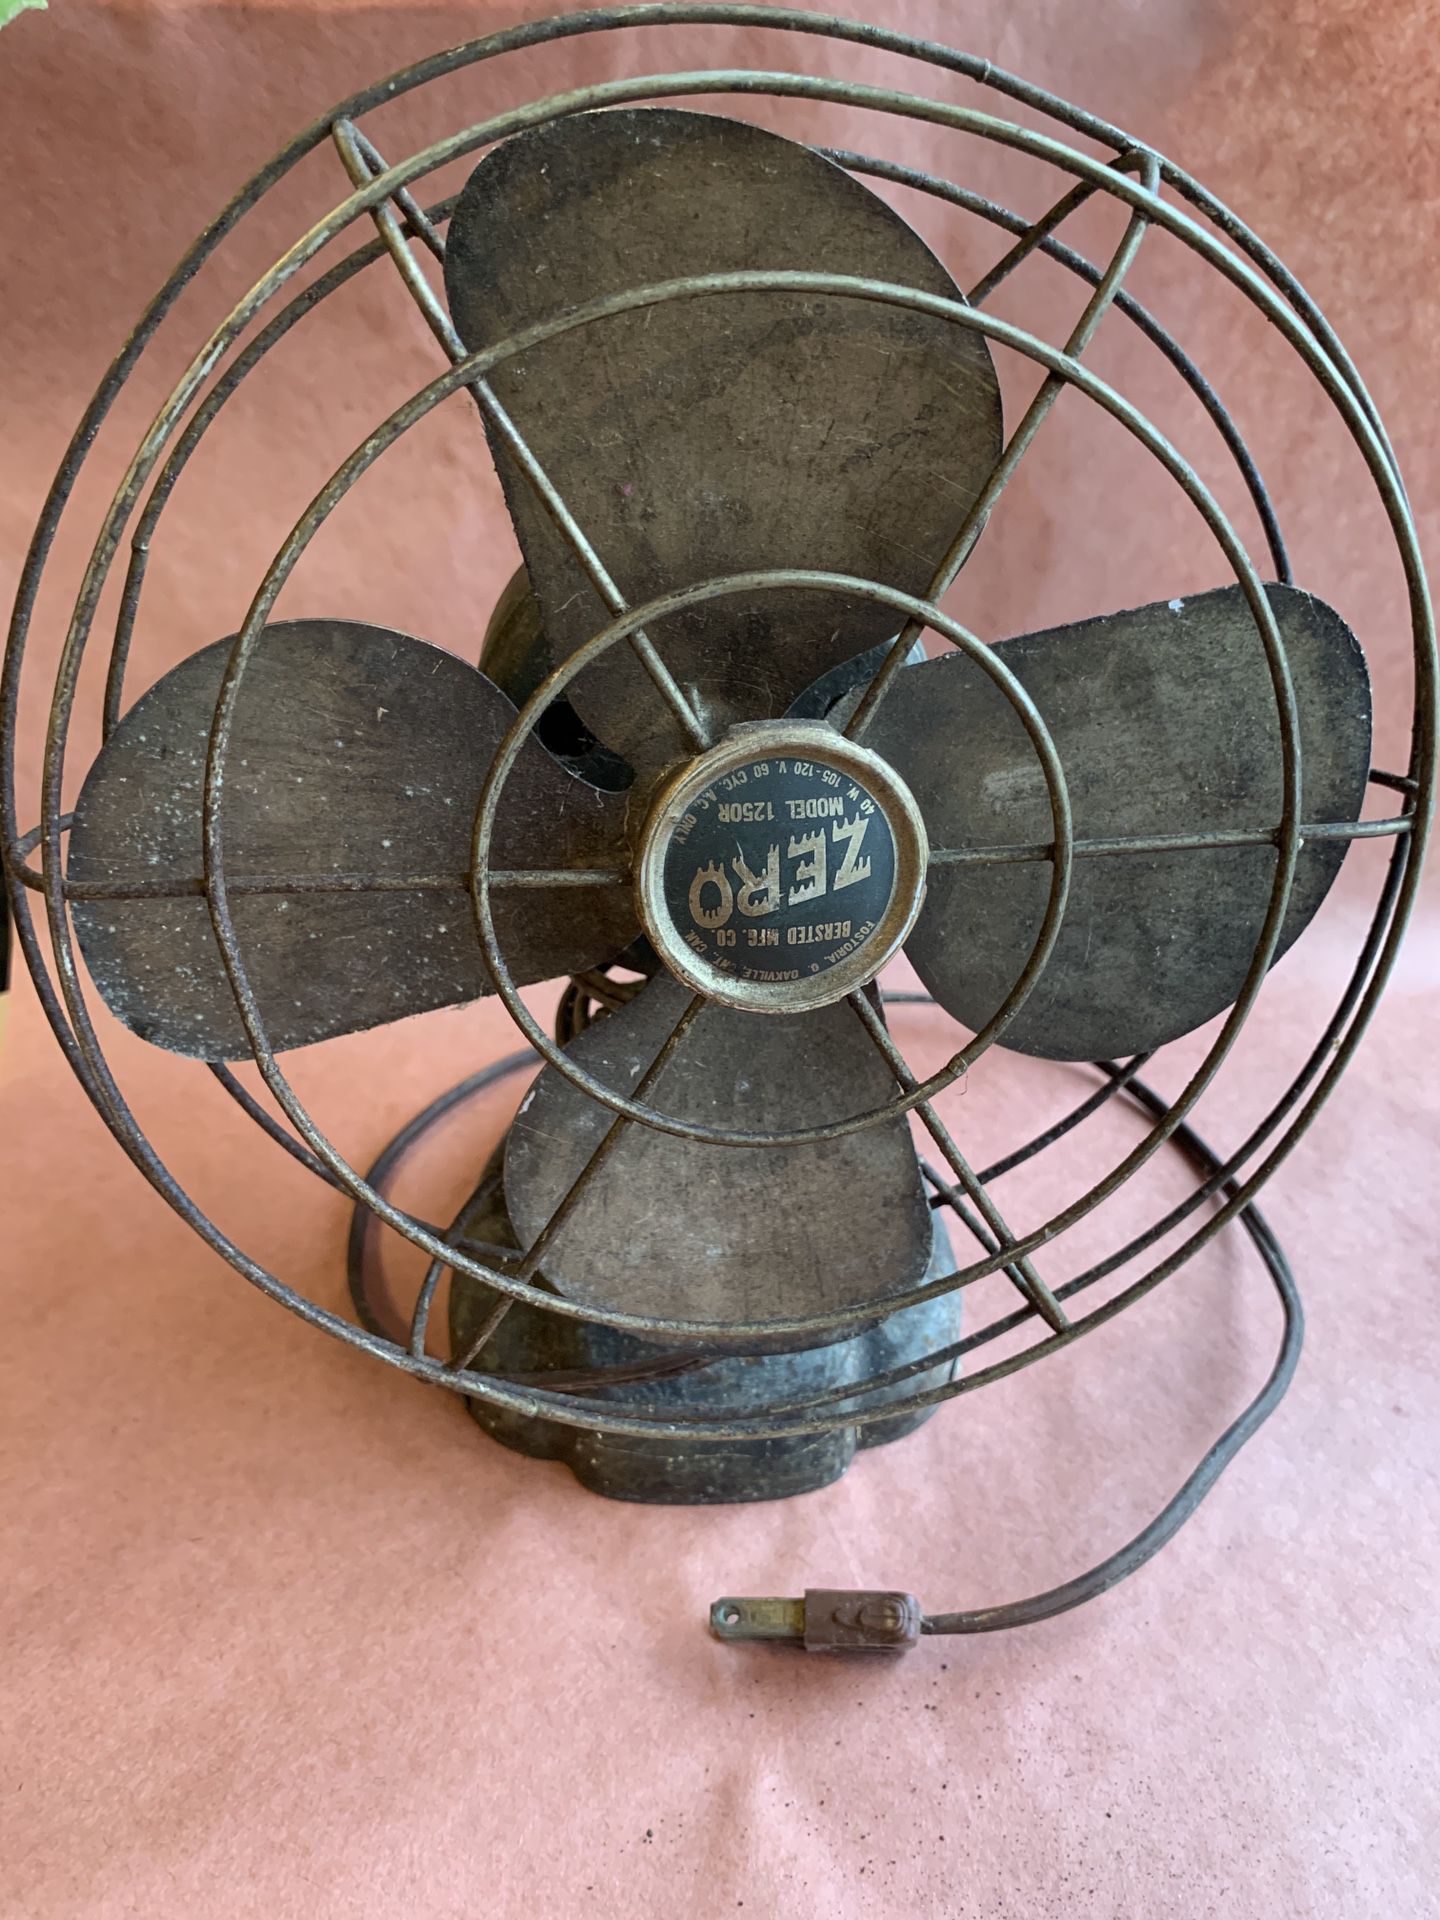 Antique vintage collectible Zero electric fan Model 1250R with metal blades